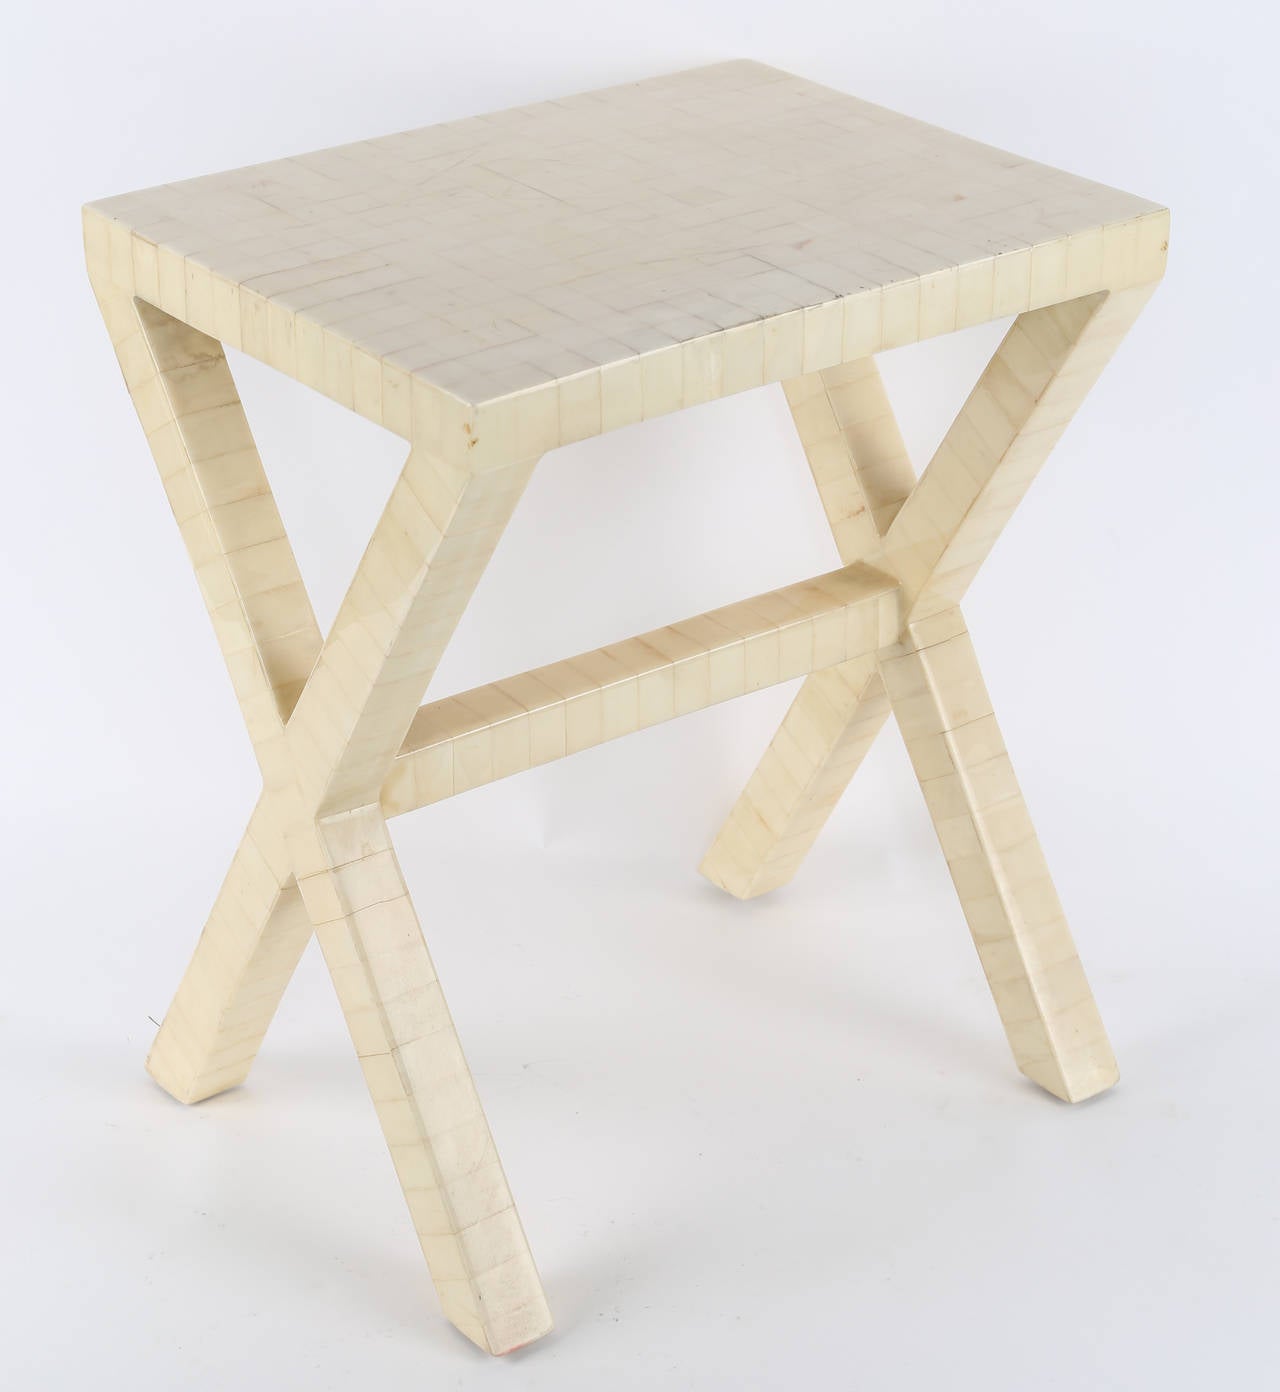 Diminutive and chic X-base occasional table clad in lacquered bone tiles. 

